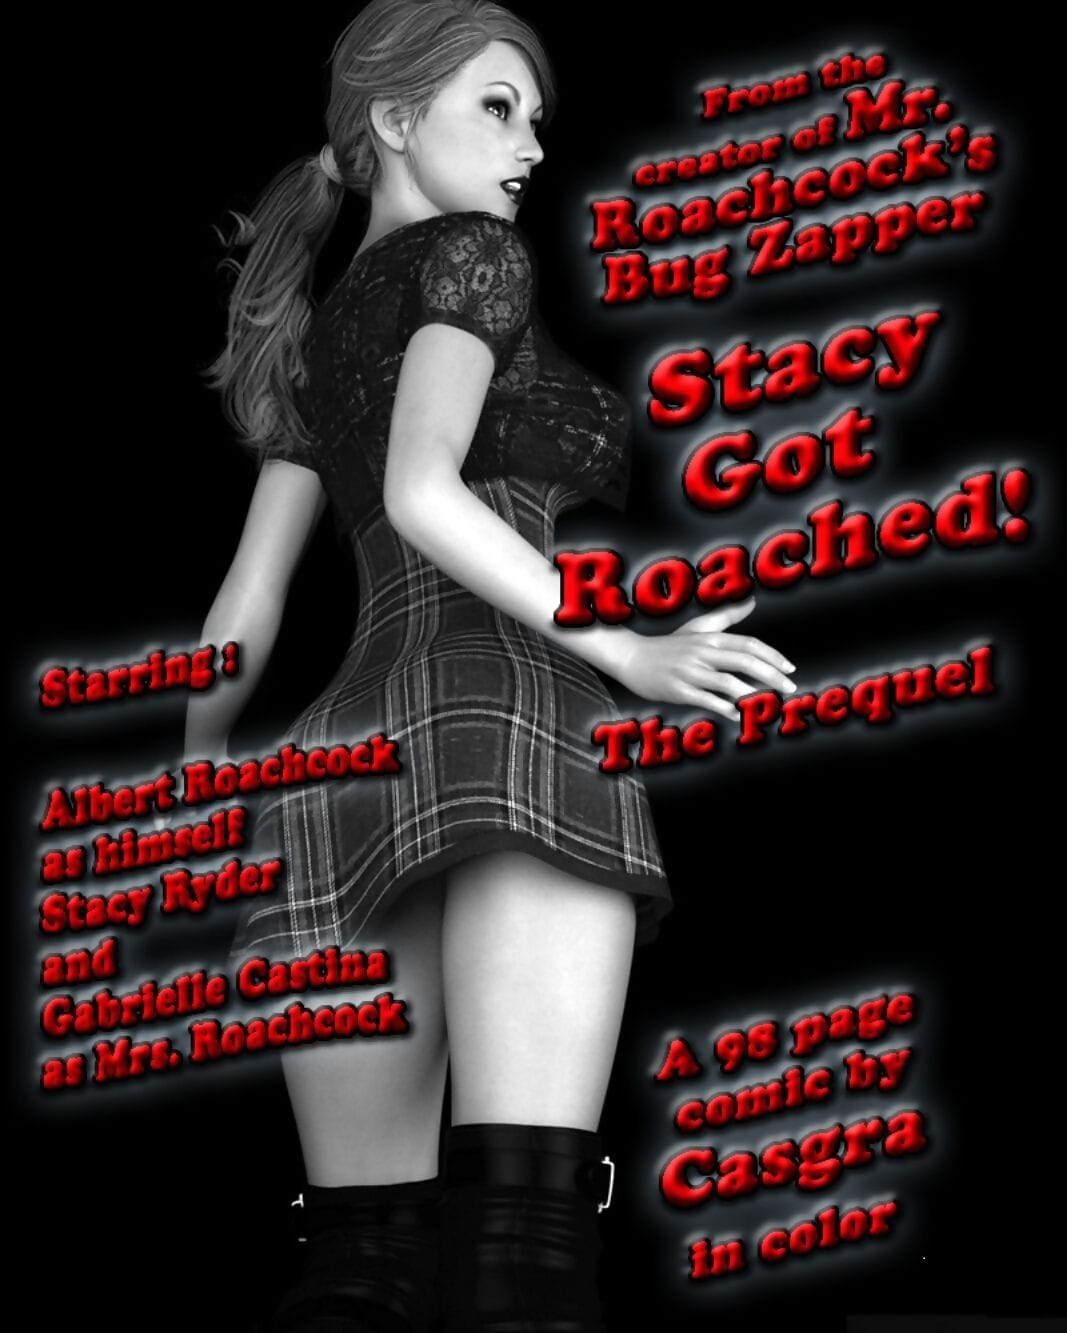 Casgra- Stacy Got Roached page 1